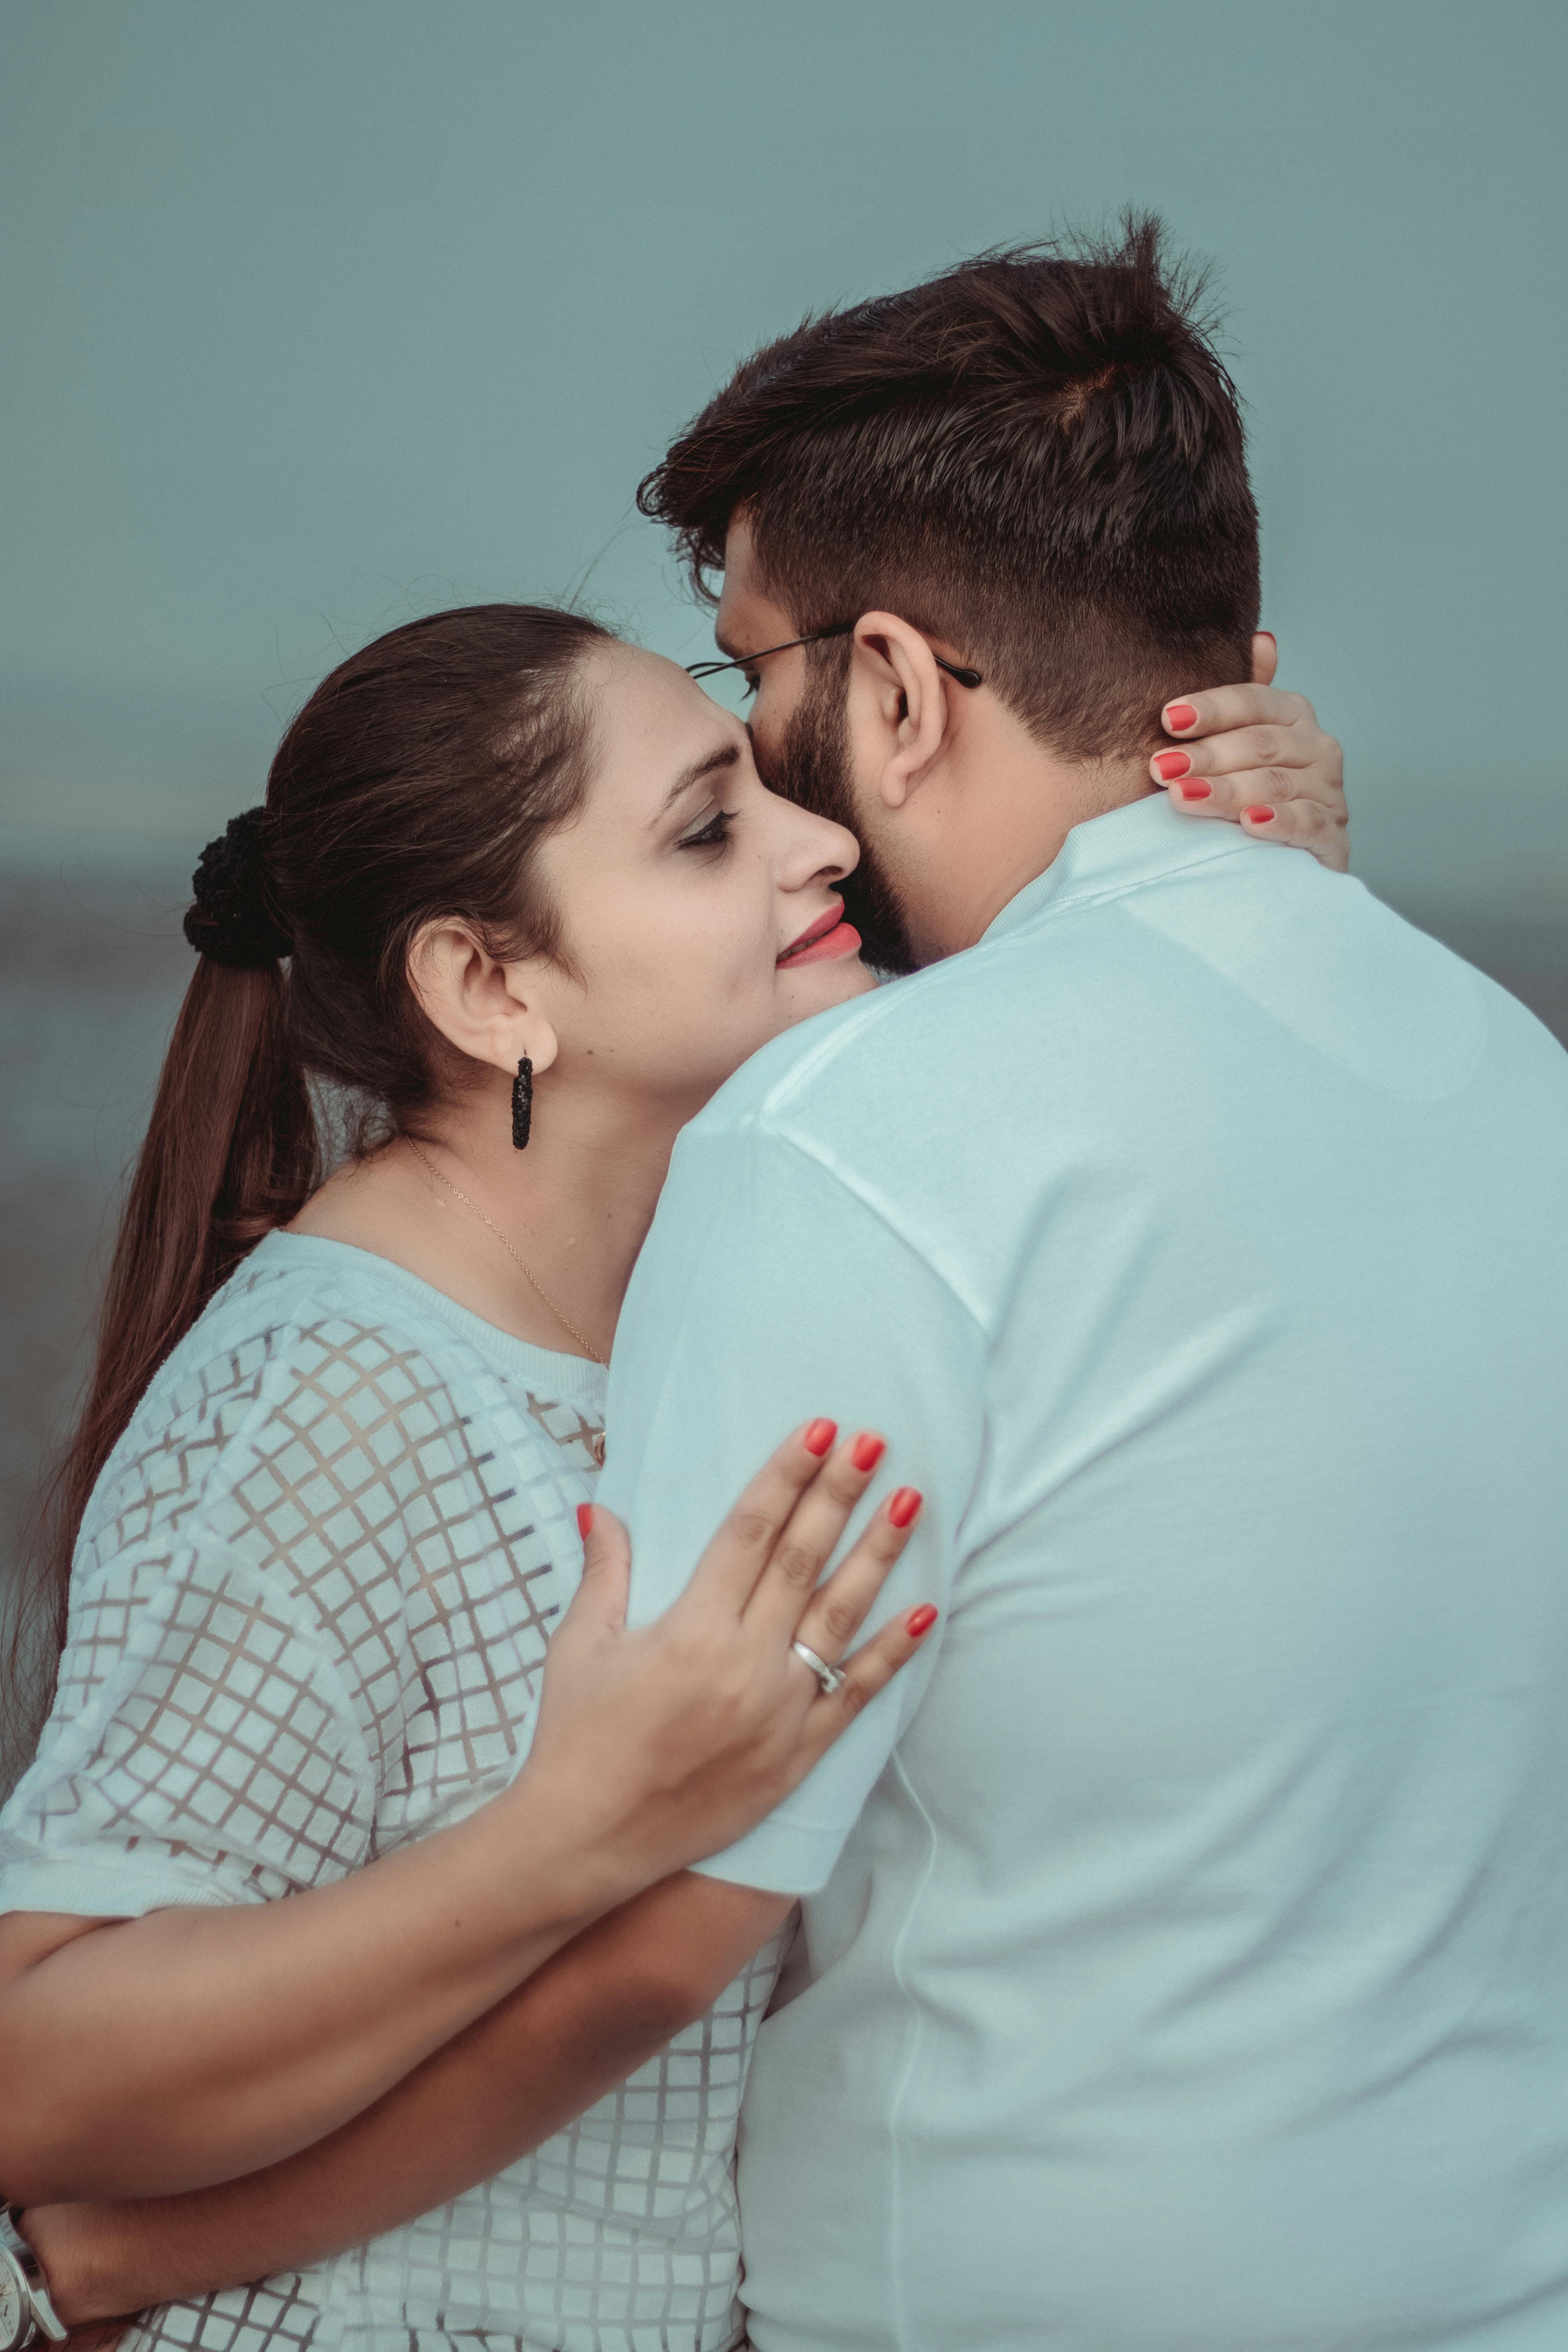 Types of hugs and what they reveal about your relationship | Times of India